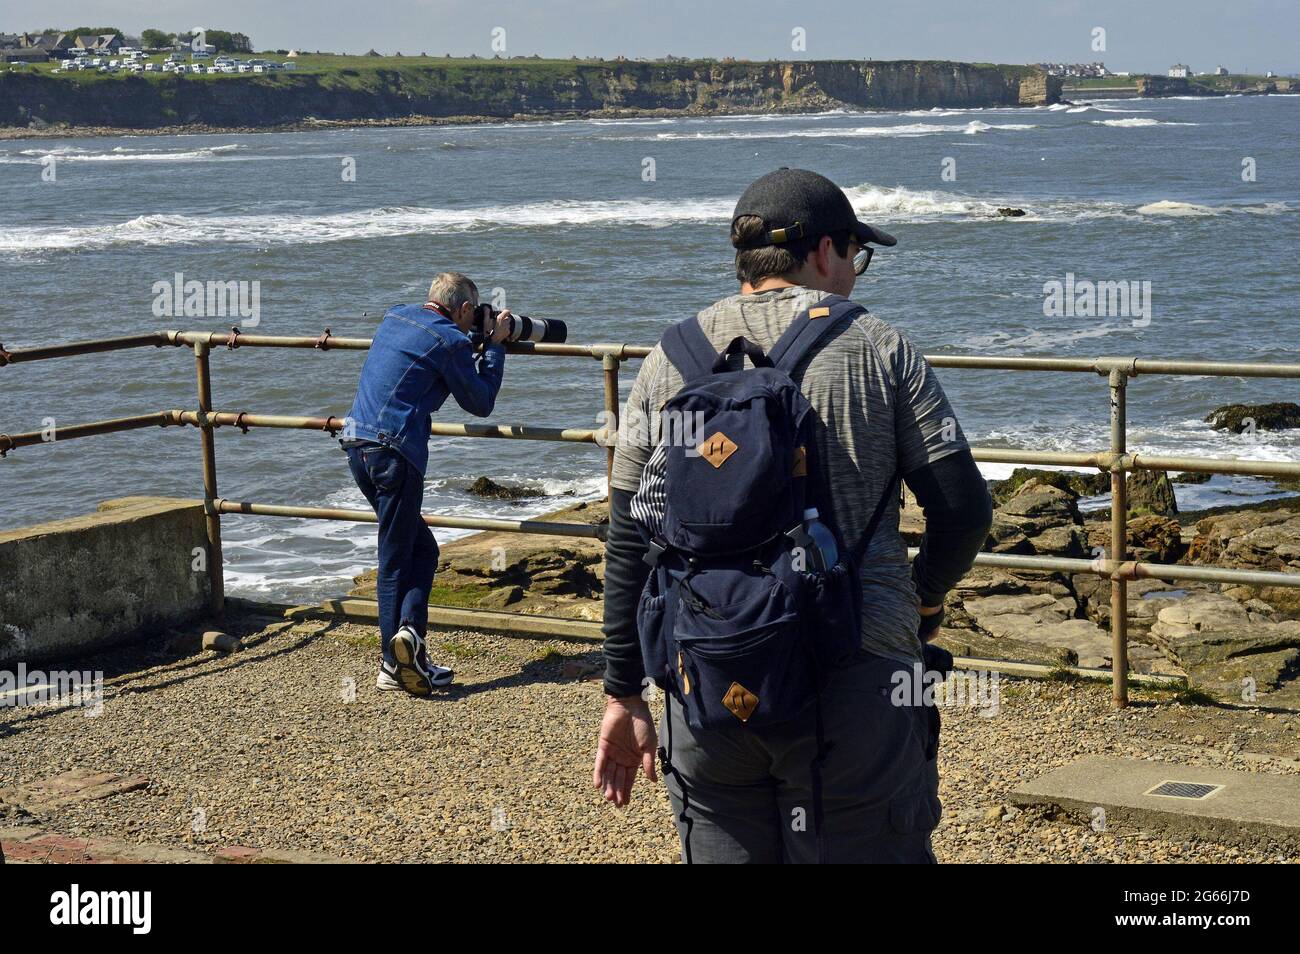 WHITLEY BAY. TYNE and WEAR. ENGLAND. 05-27-21. St. Mary's Island, two photographers at work photographing the local wildlife. Stock Photo